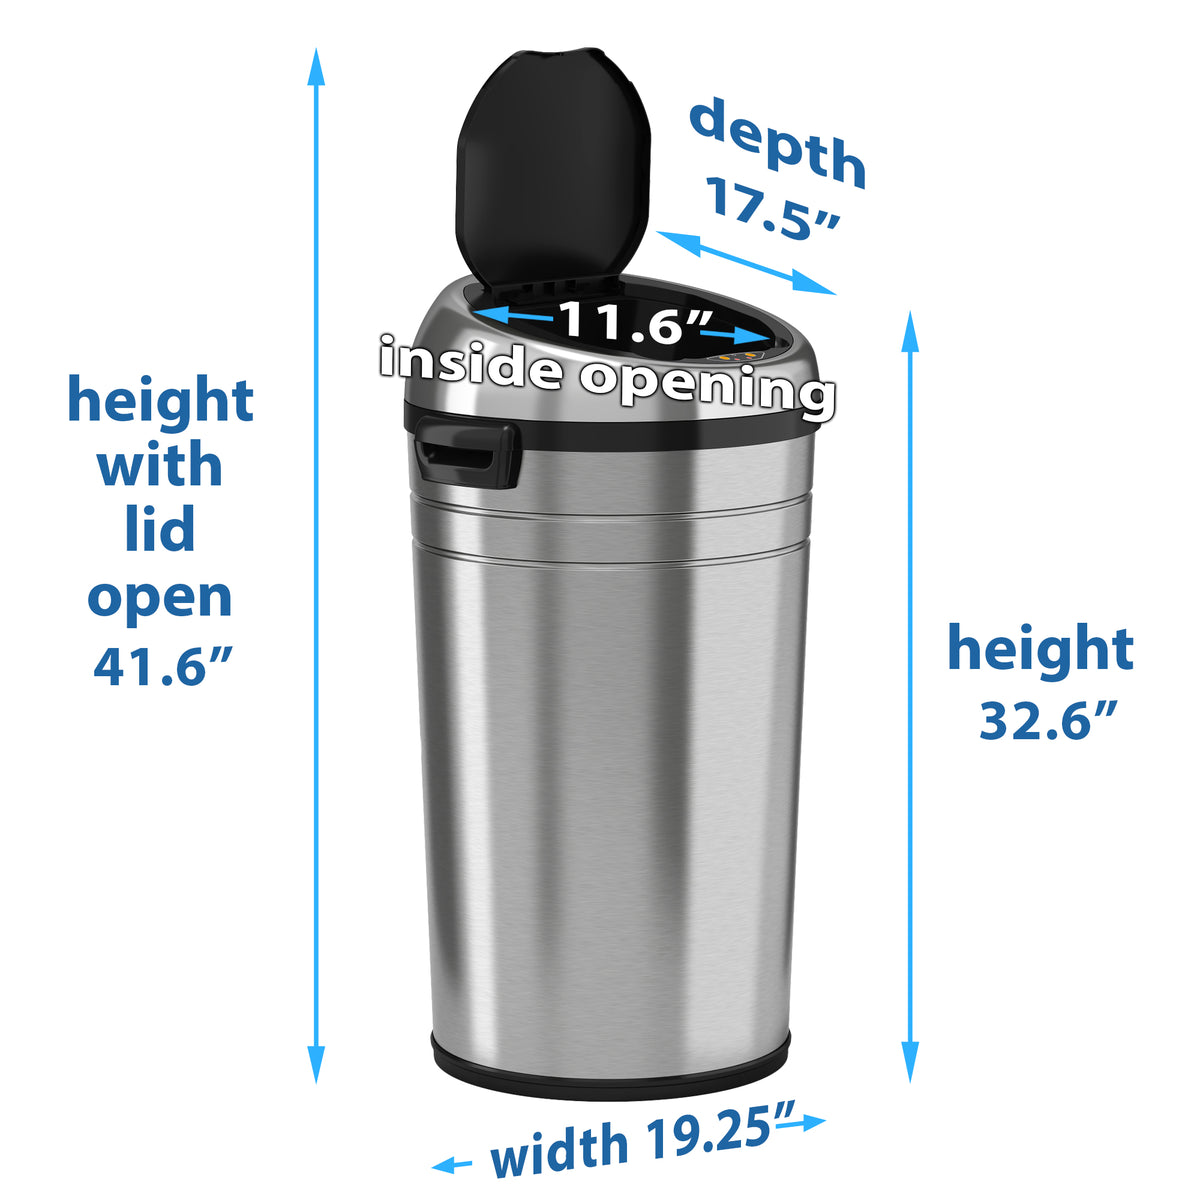 iTouchess 23 Gallon Sensor Trash Can with Wheels dimensions